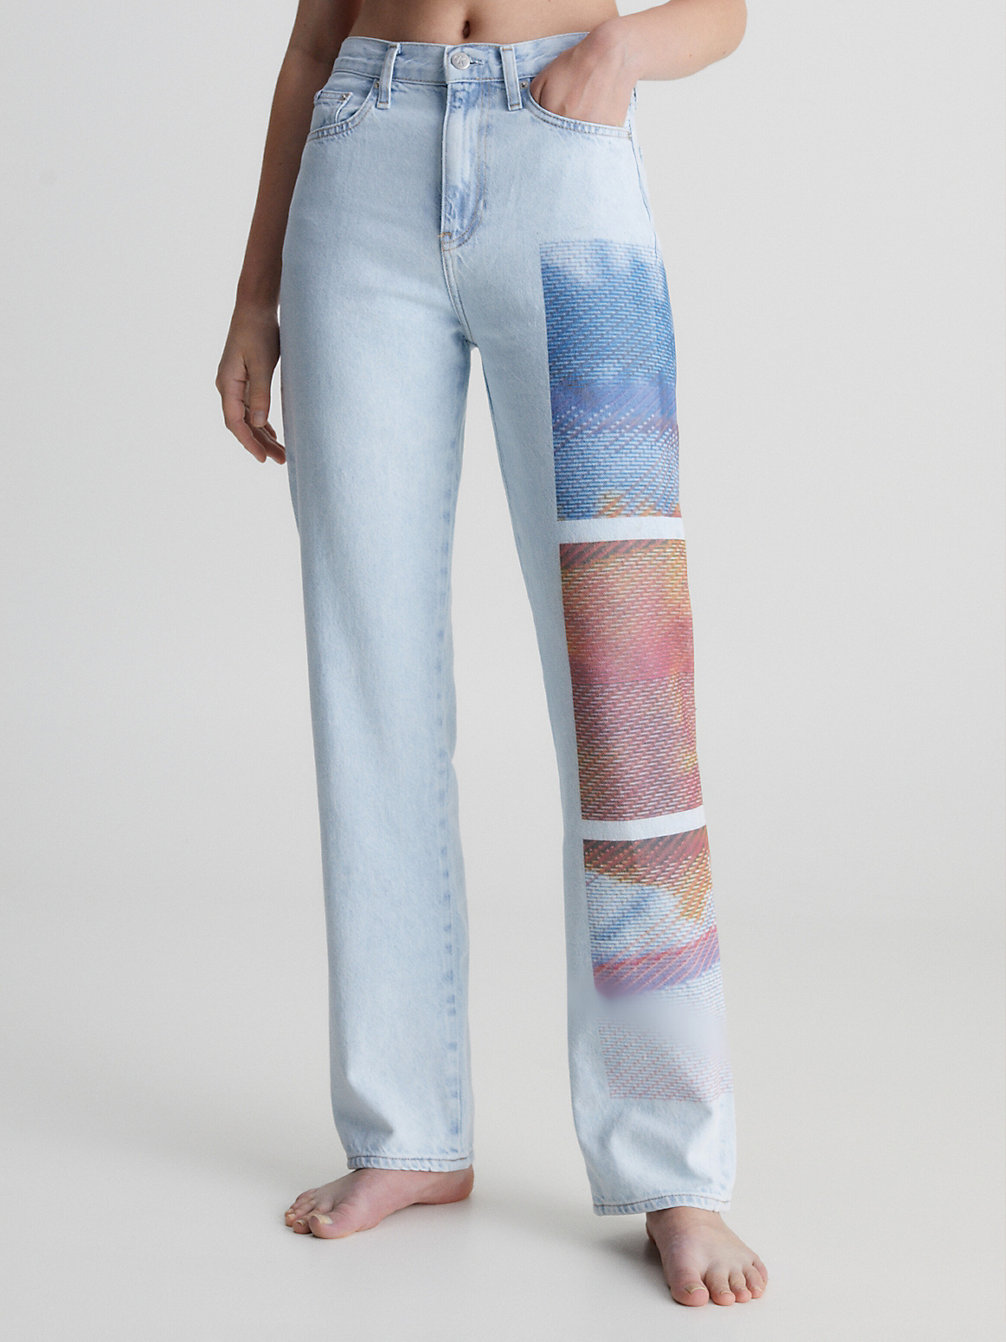 High Rise Relaxed Jeans Stampati > DENIM LIGHT > undefined donna > Calvin Klein